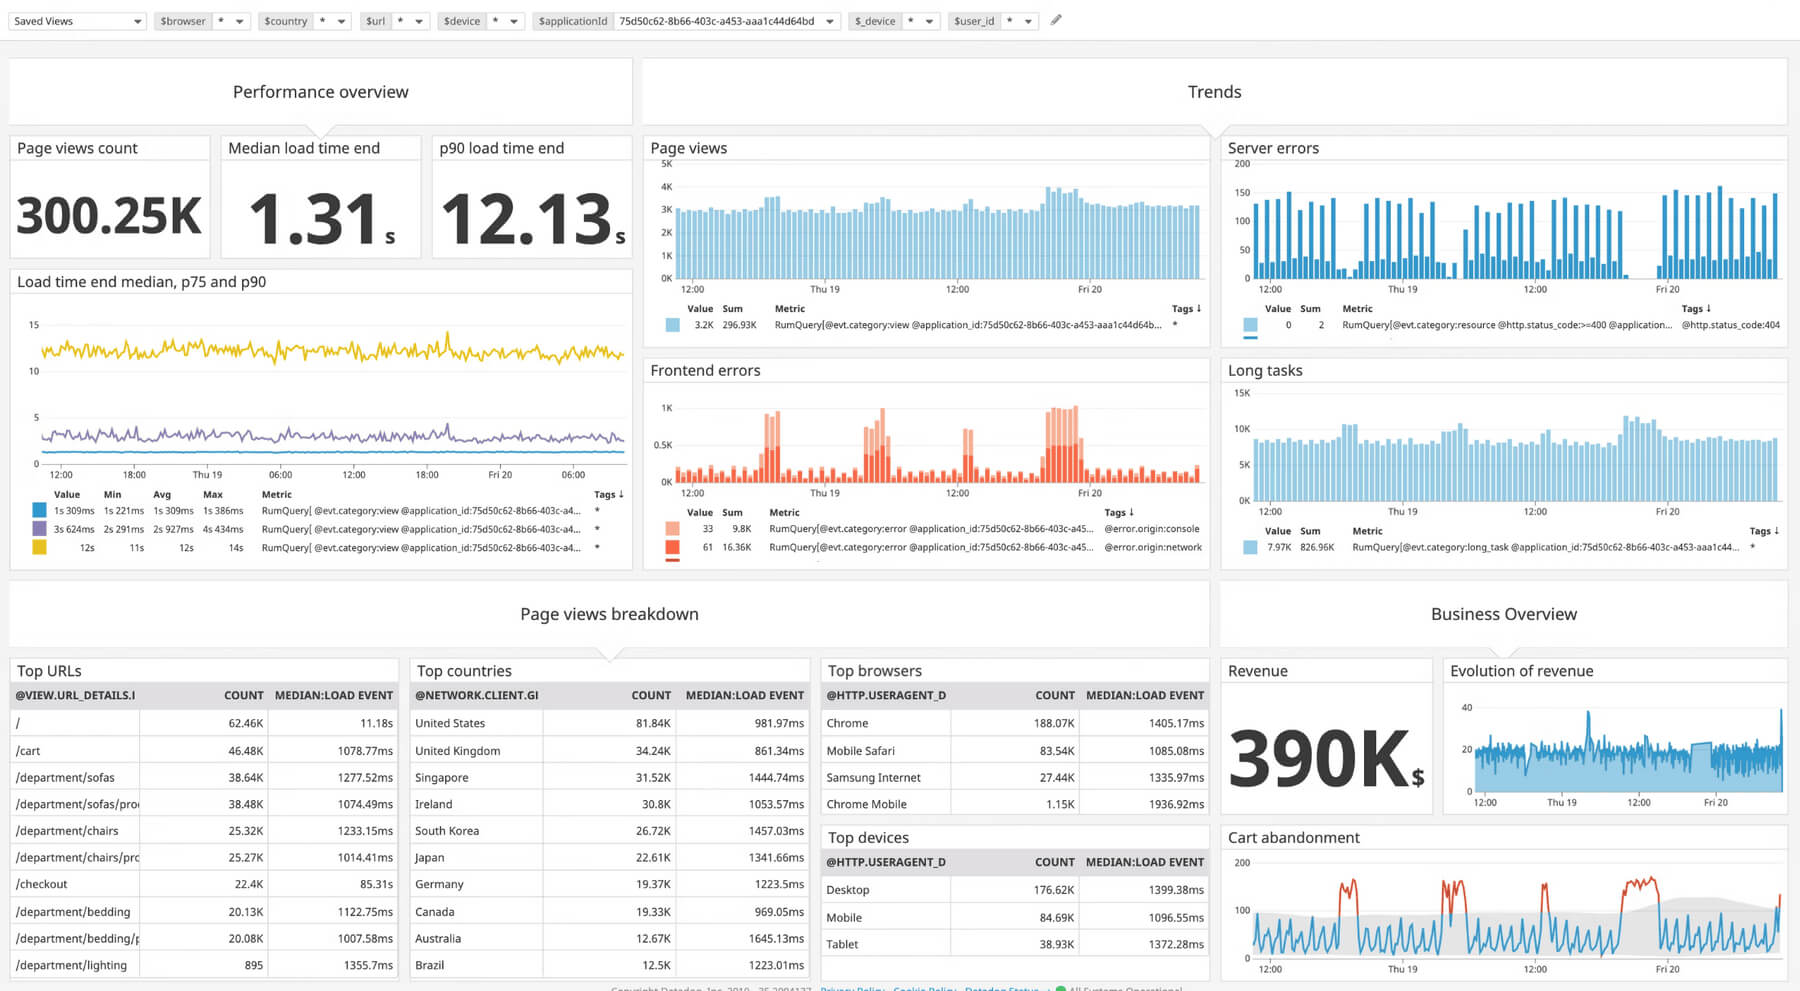 Dashboard for business leaders to track performance metrics and trends